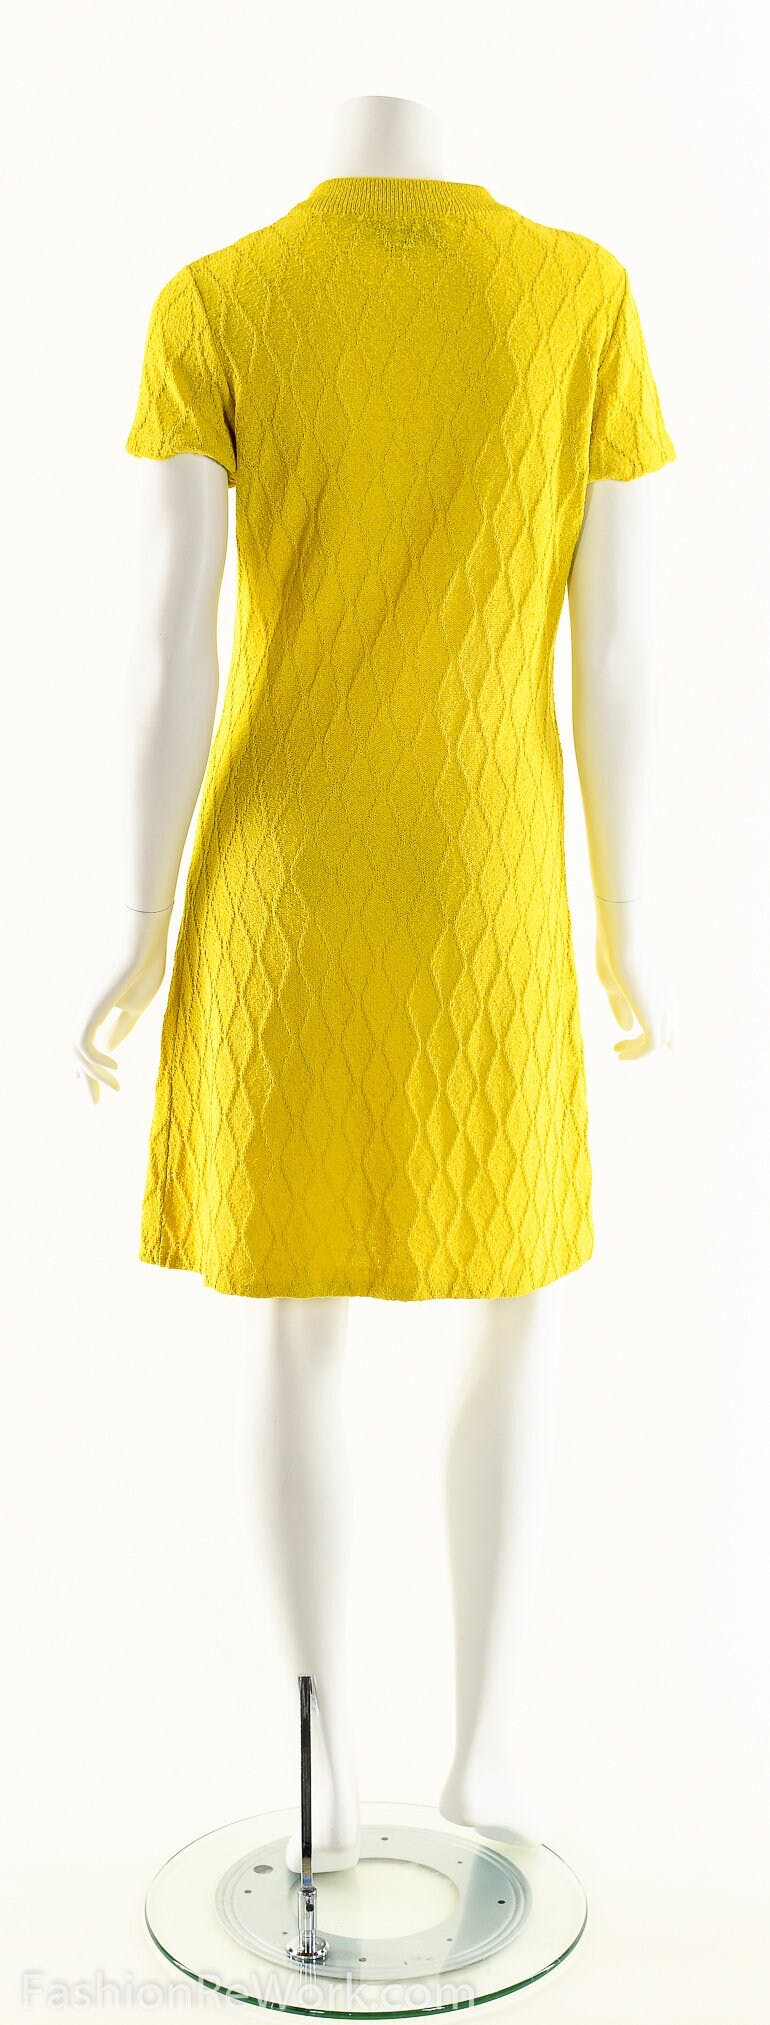 Vintage 60’s Iconic Goldworm Knit Dress by Goldworm | Shop THRILLING